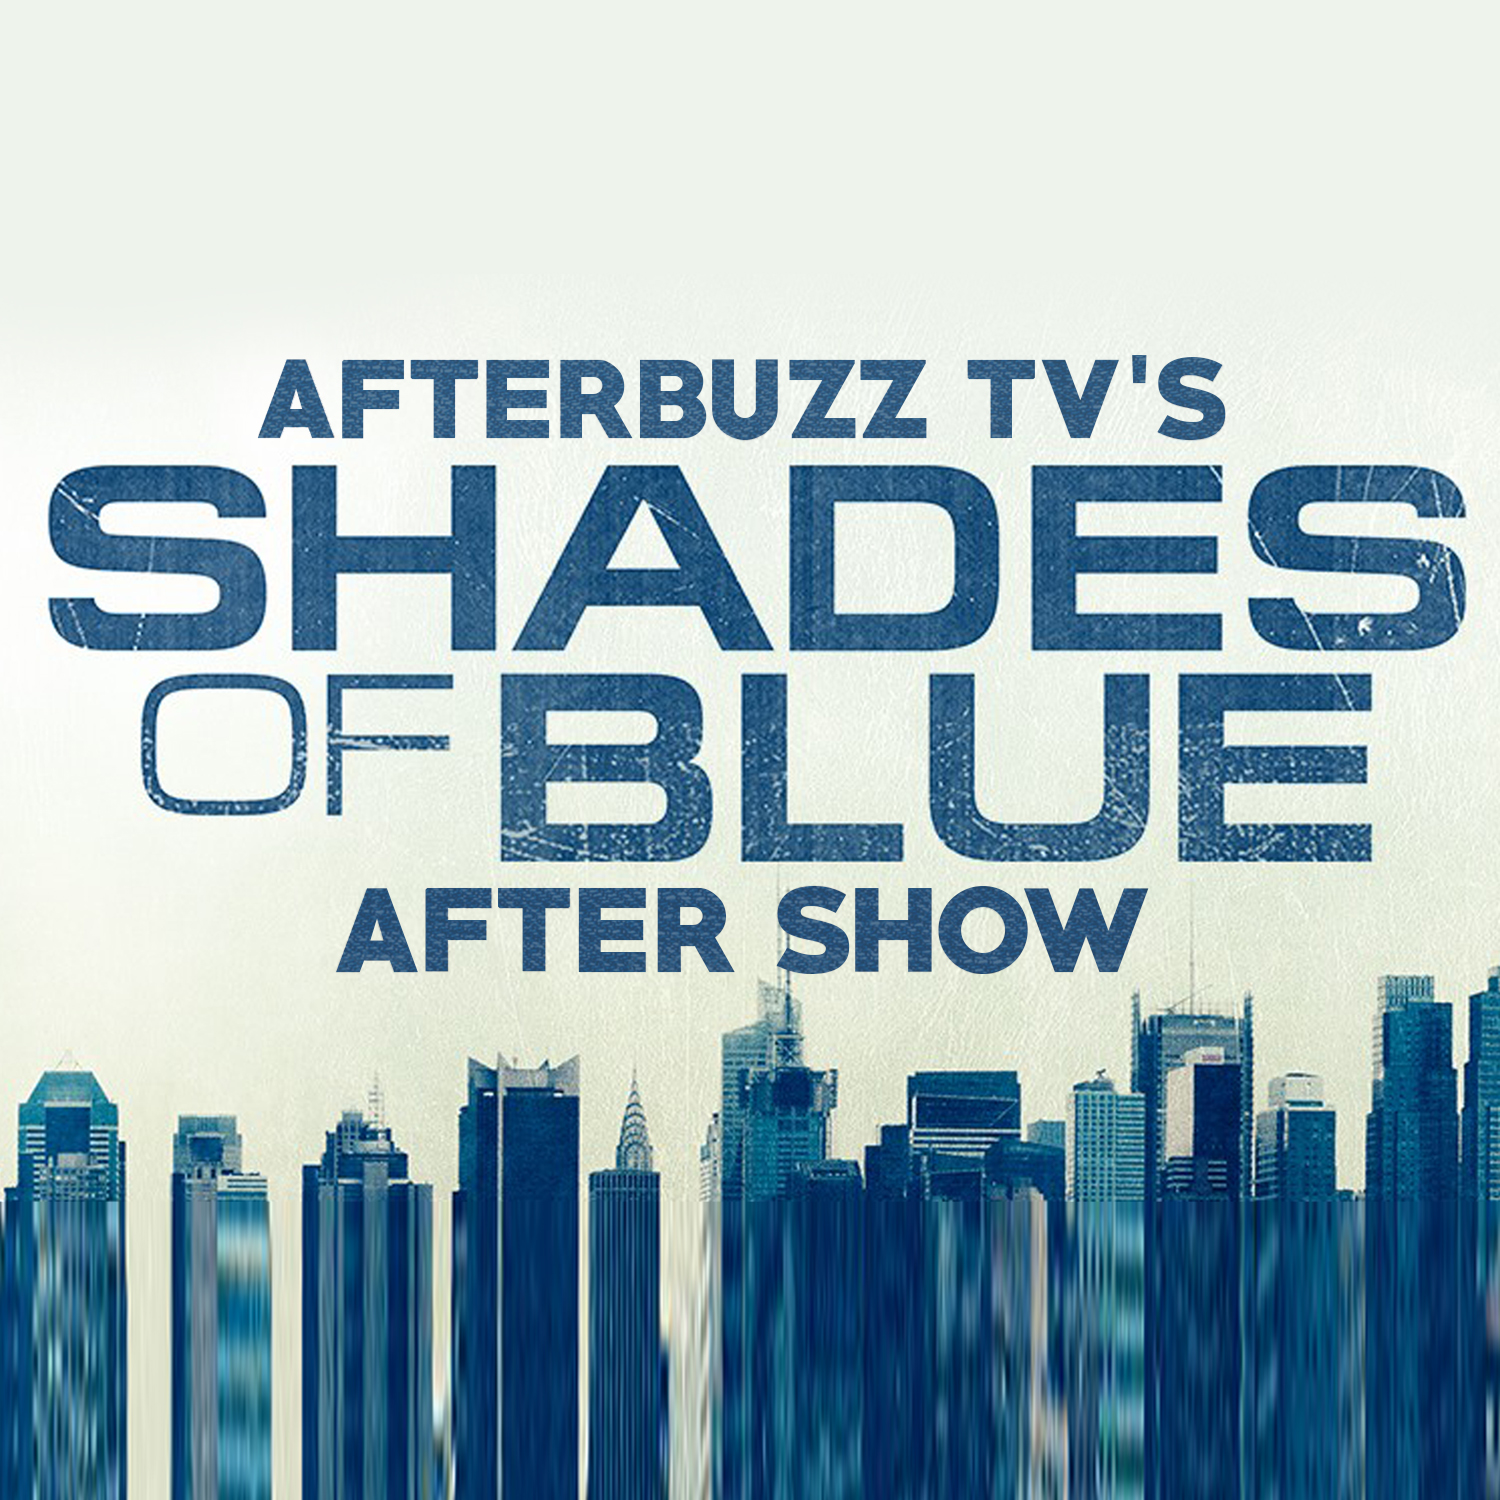 Shades Of Blue S:3 | The Blue Wall E:5 | AfterBuzz TV AfterShow